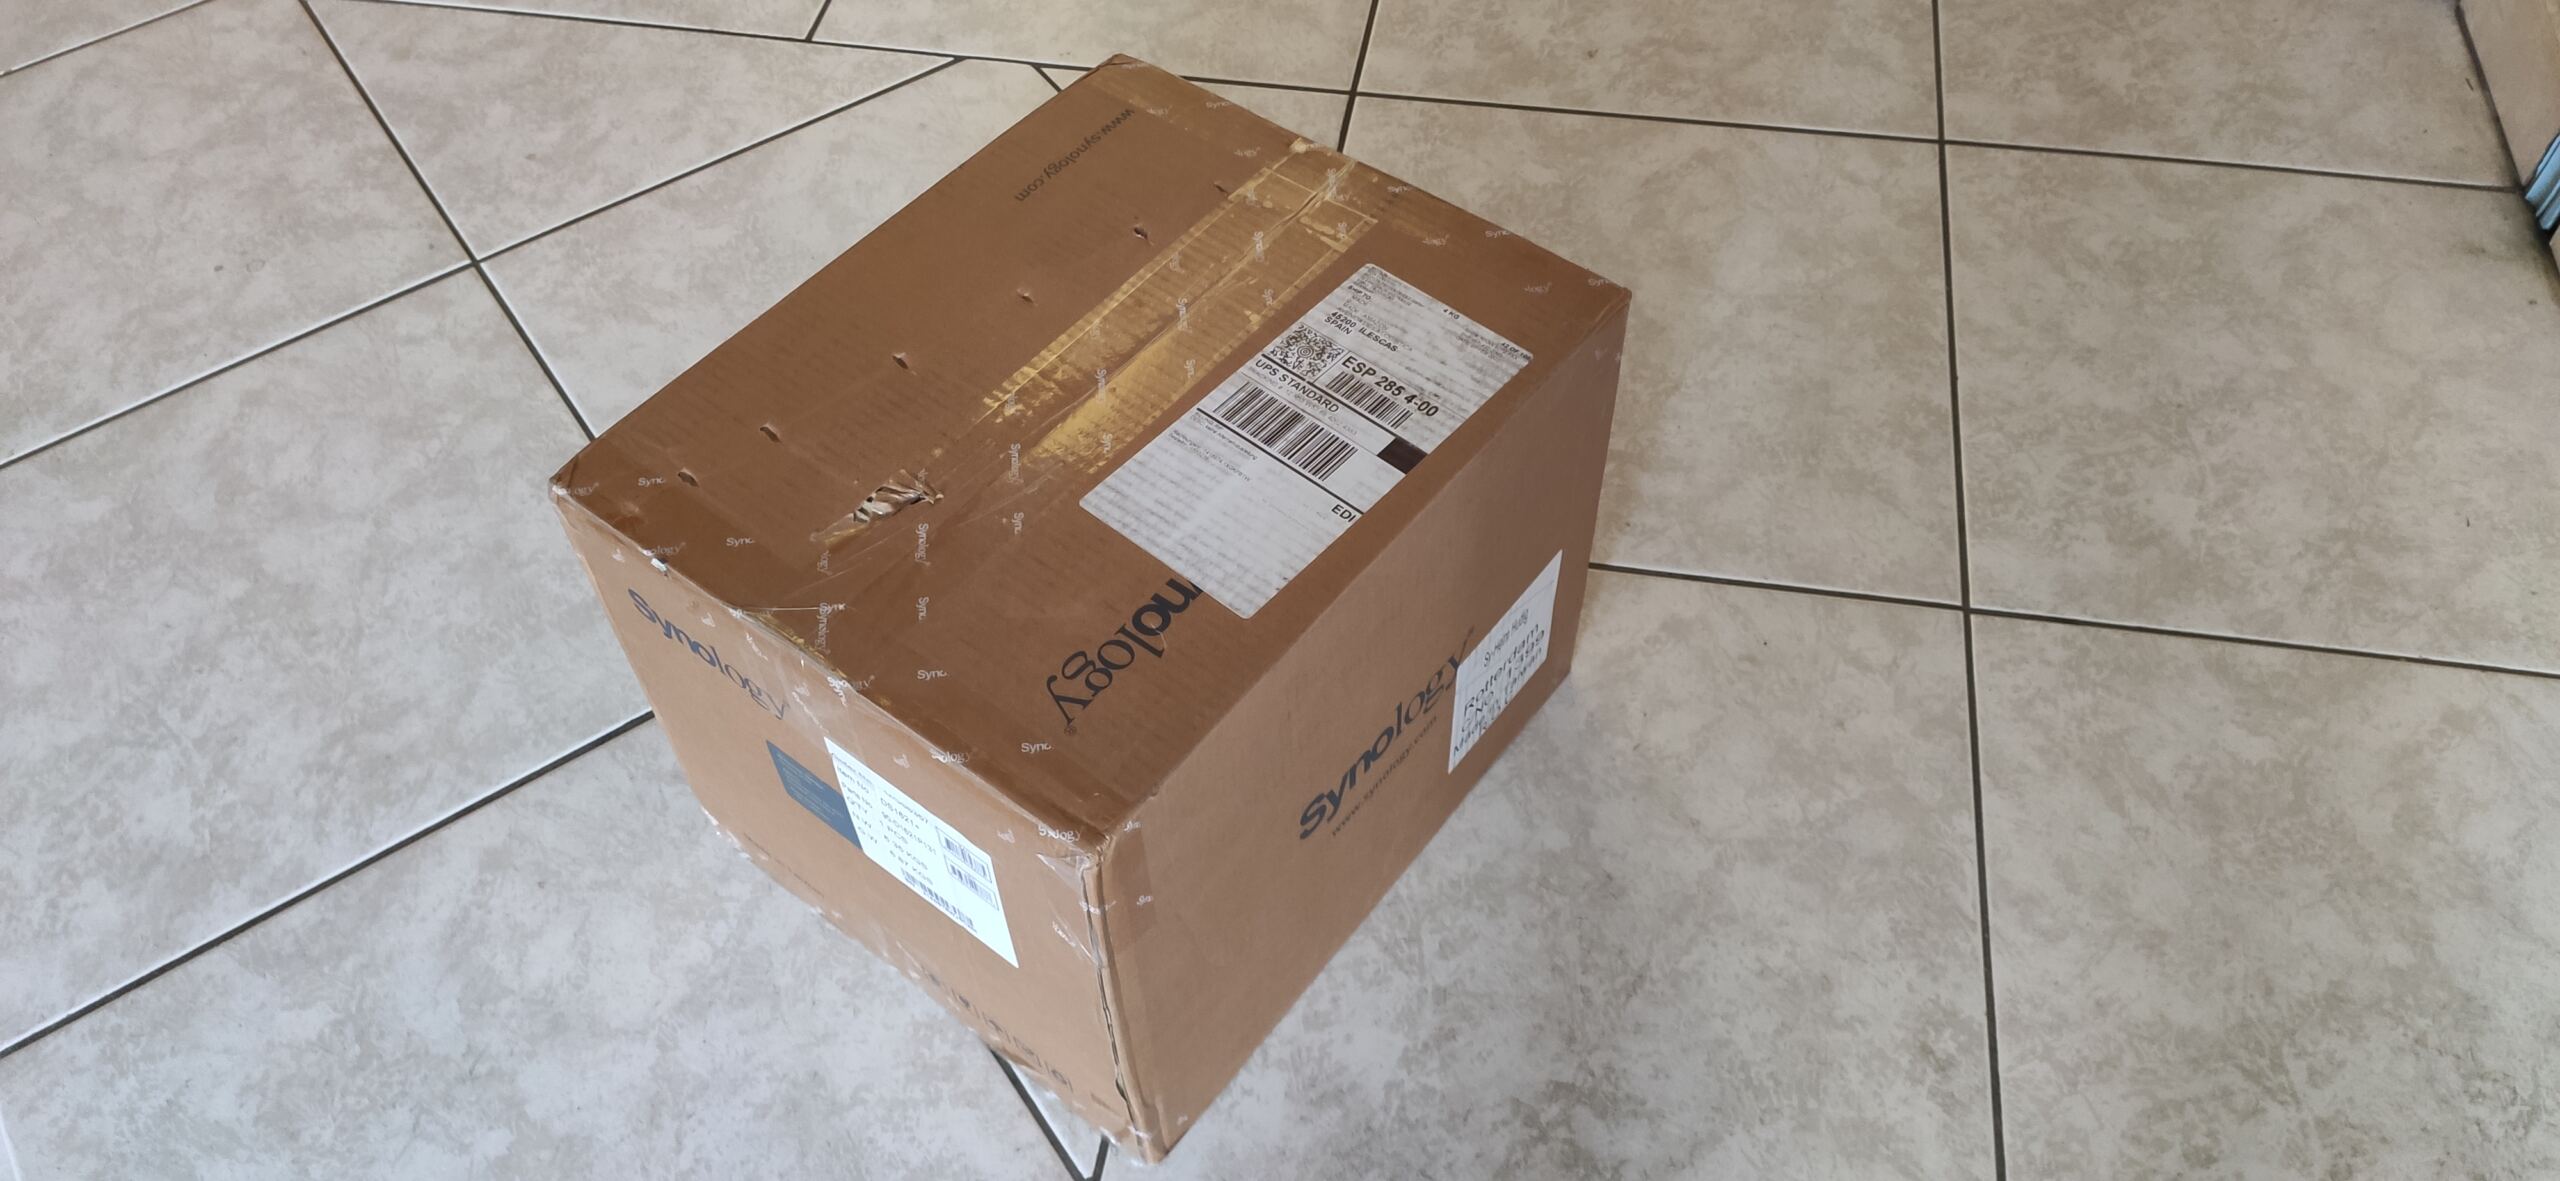 View of the Synology 1621+ packaging